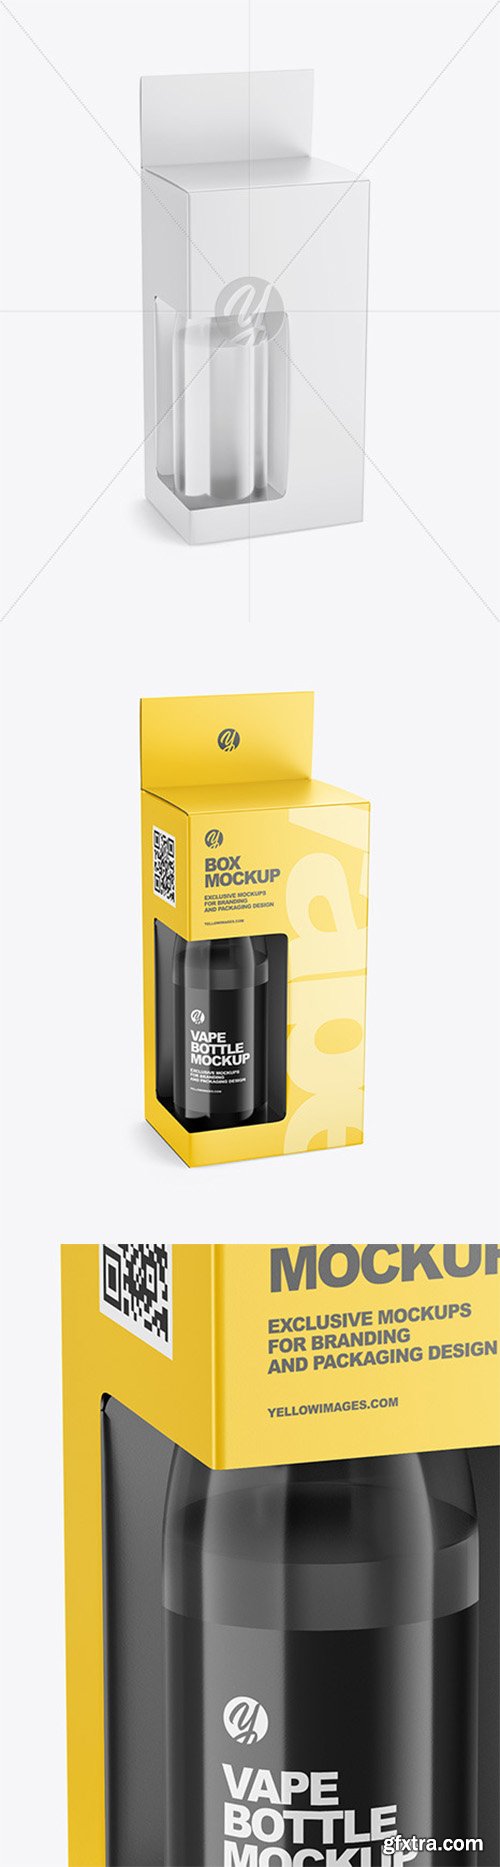 Download Box With Plastic Bottle Mockup 57116 Gfxtra Yellowimages Mockups